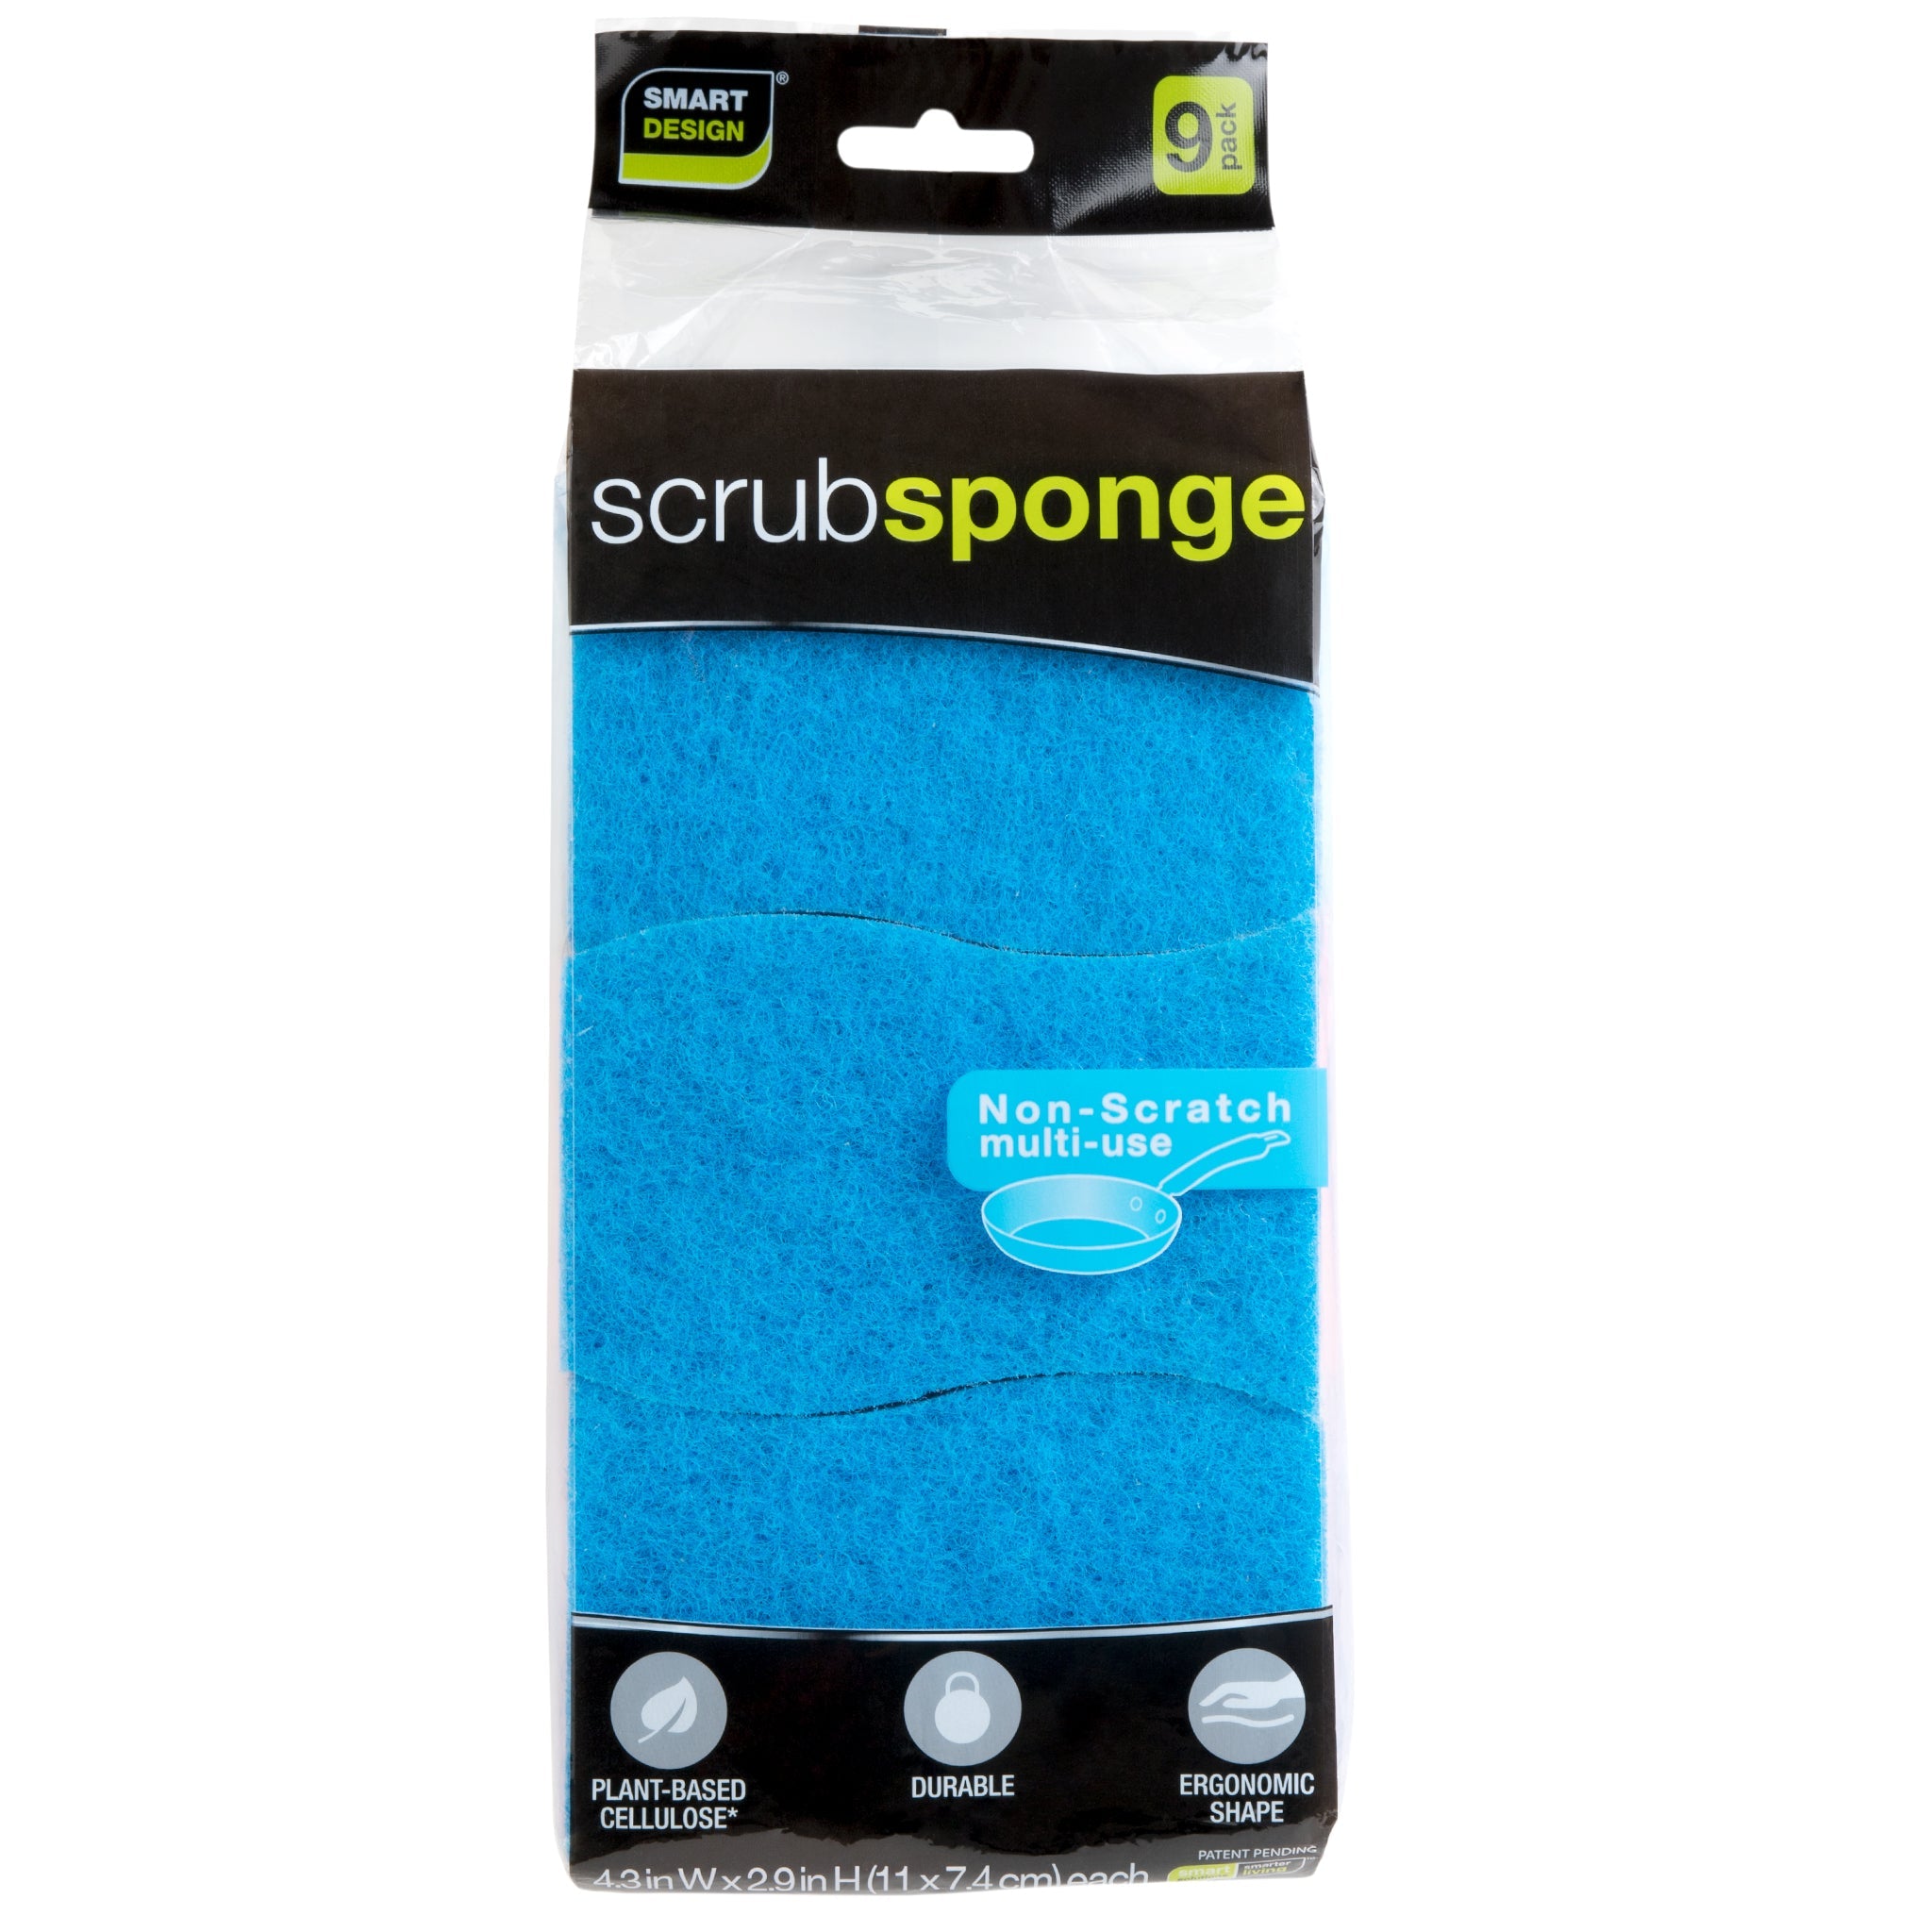 Non-Scratch Cellulose Smart Scrub Sponge Ultra Absorbent Ergonomic Shape Cleaning, Dishes, & Hard Stains - Smart Design 10